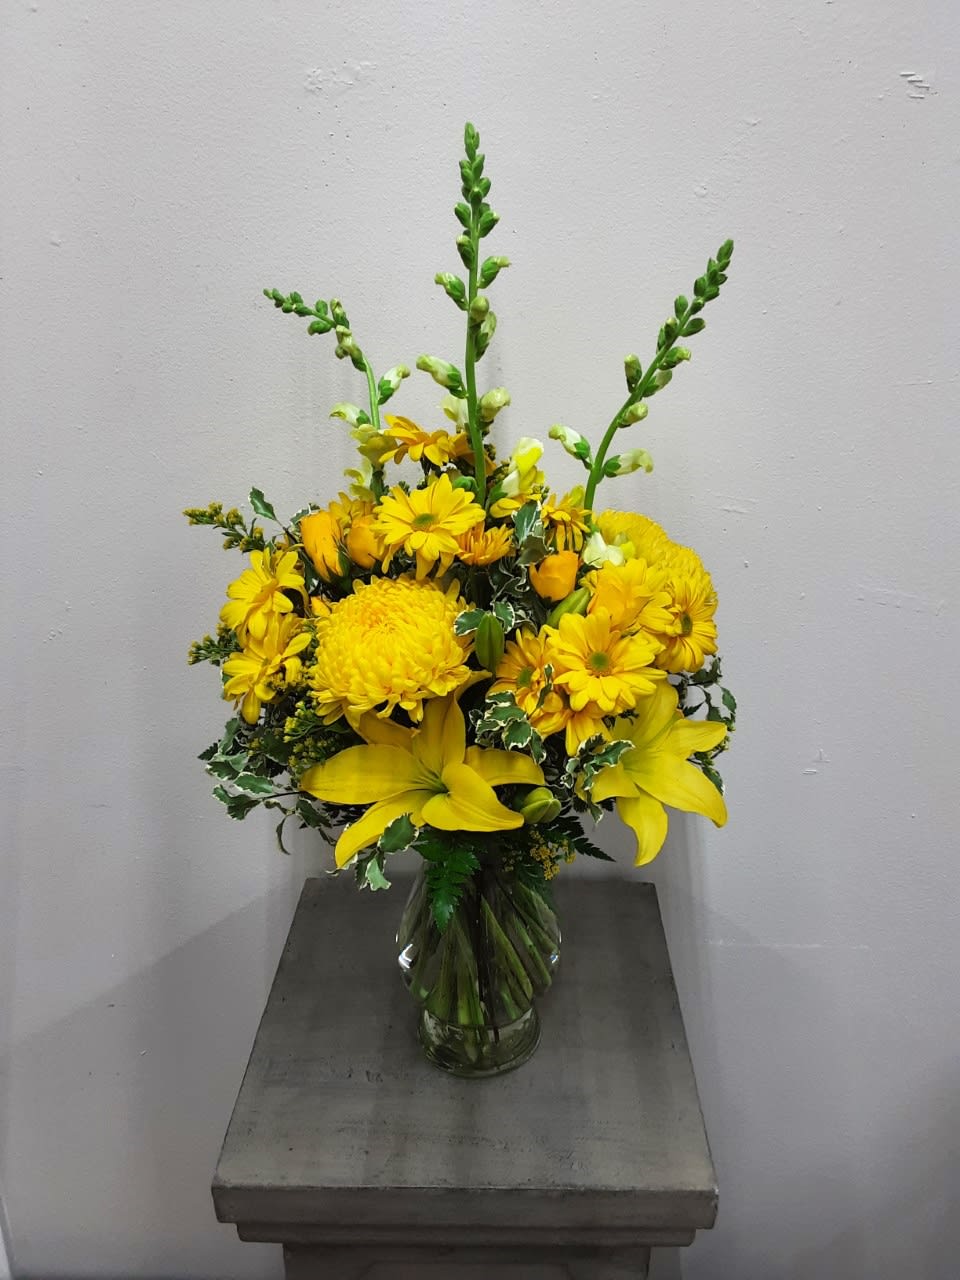 Assortment of yellow flowers will brighten any occasion and any room. 
Sure